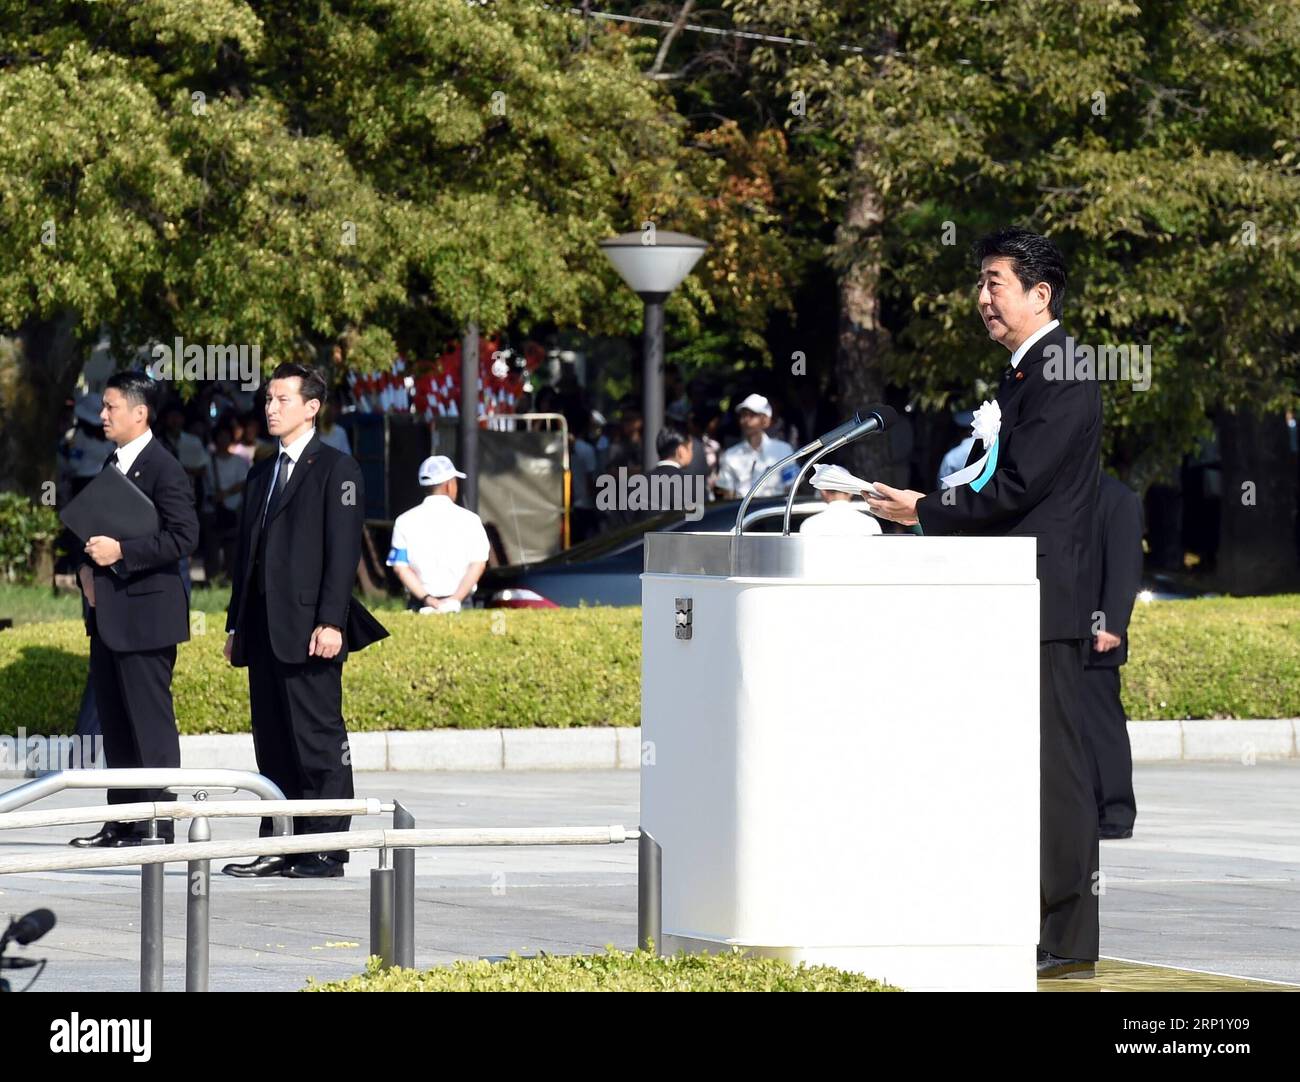 (180806) -- HIROSHIMA, Aug. 6, 2018 -- Japanese Prime Minister Shinzo Abe (Front) speaks during a ceremony commemorating the 73rd anniversary of the atomic bombing of Hiroshima at the Peace Memorial Park in Hiroshima, Japan on Aug. 6, 2018. ) (wtc) JAPAN-HIROSHIMA-73RD ANNIVERSARY-ATOMIC BOMBING MaxPing PUBLICATIONxNOTxINxCHN Stock Photo